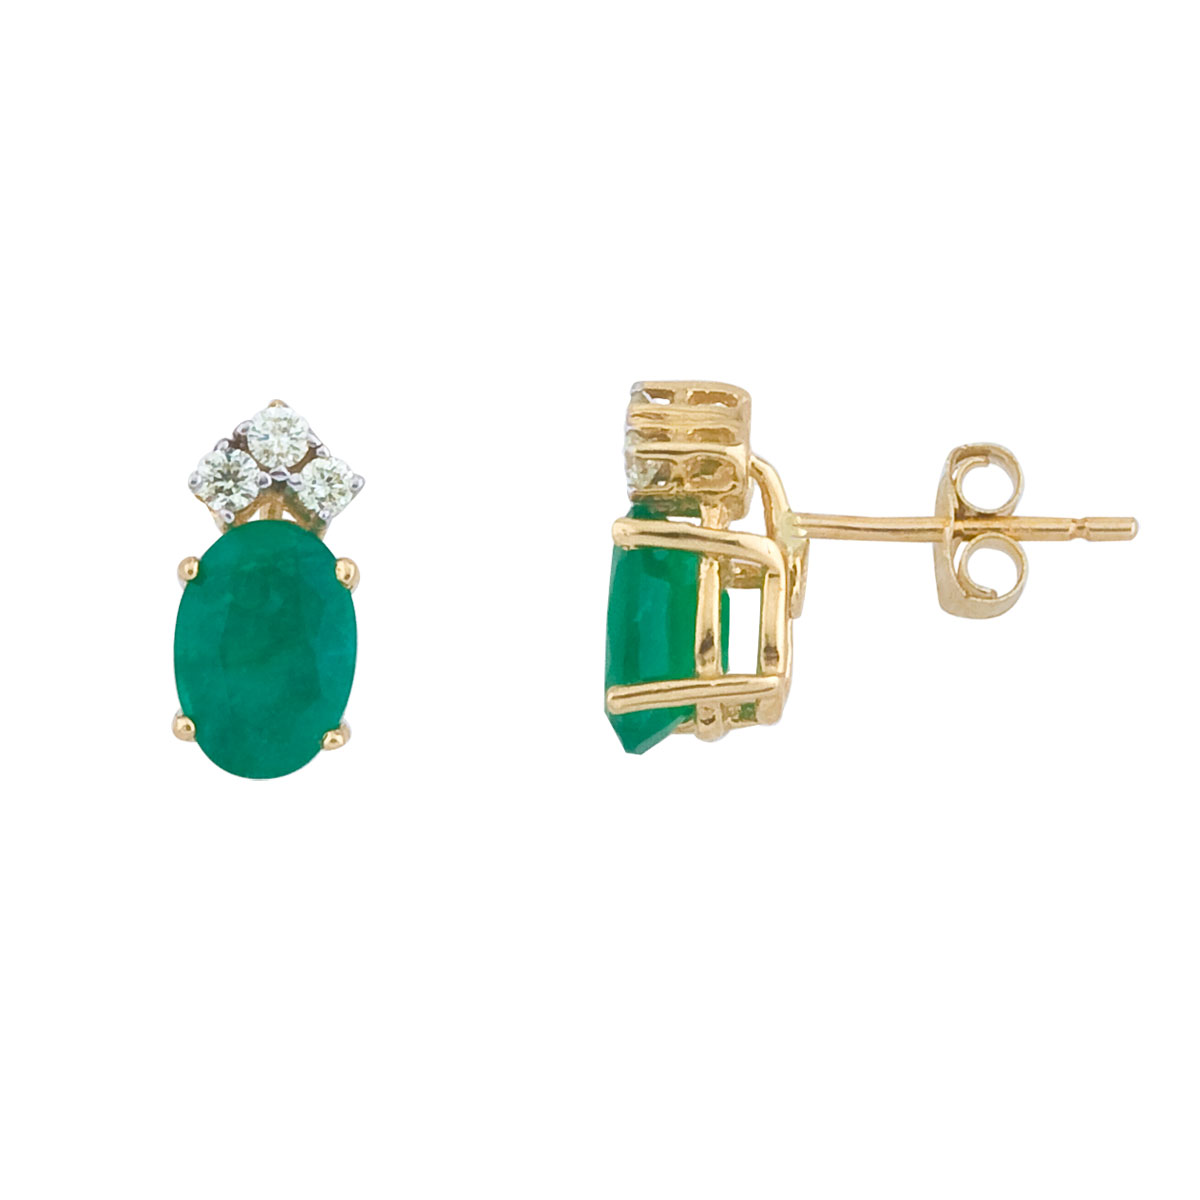 These 7x5 mm oval shaped emerald earrings are set in beautiful 14k yellow gold and feature .12 to...